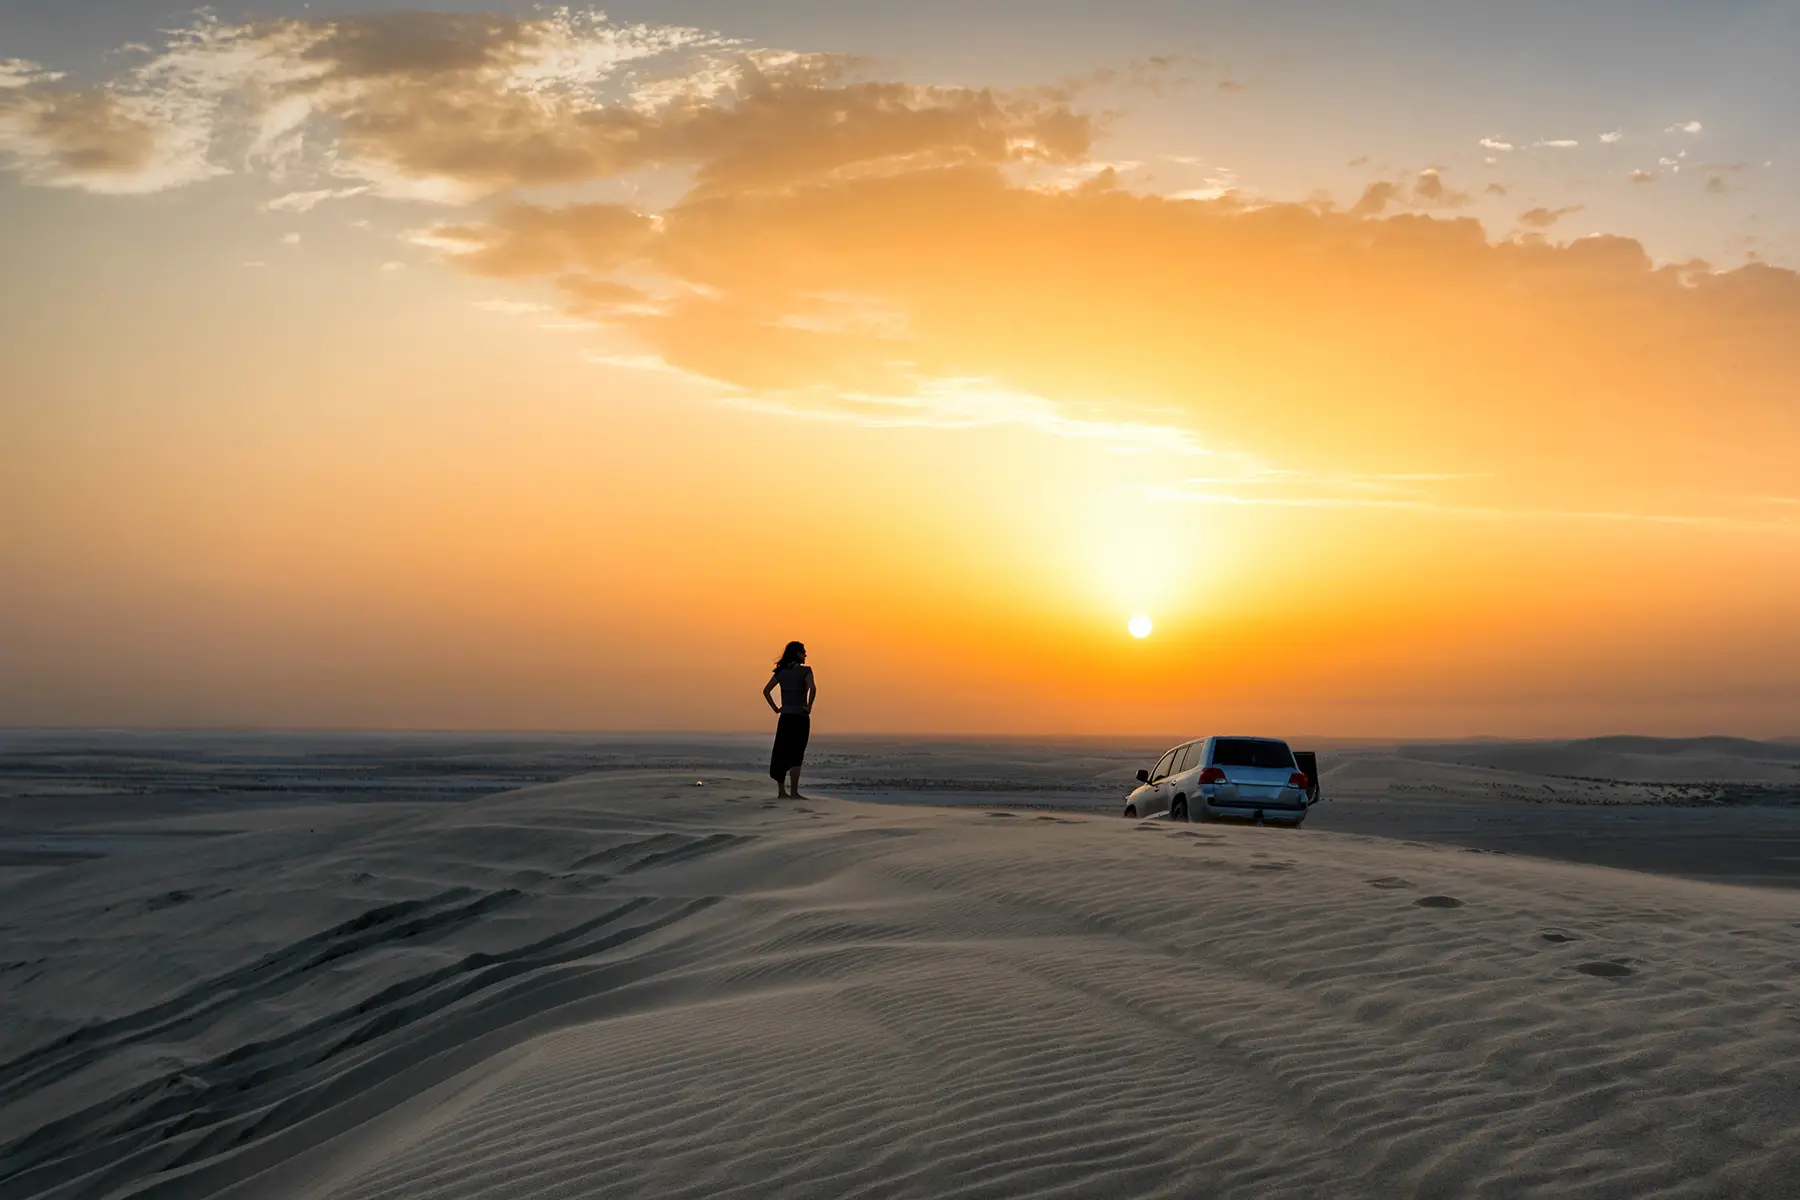 Driving through sand dunes in Qatar at sunset